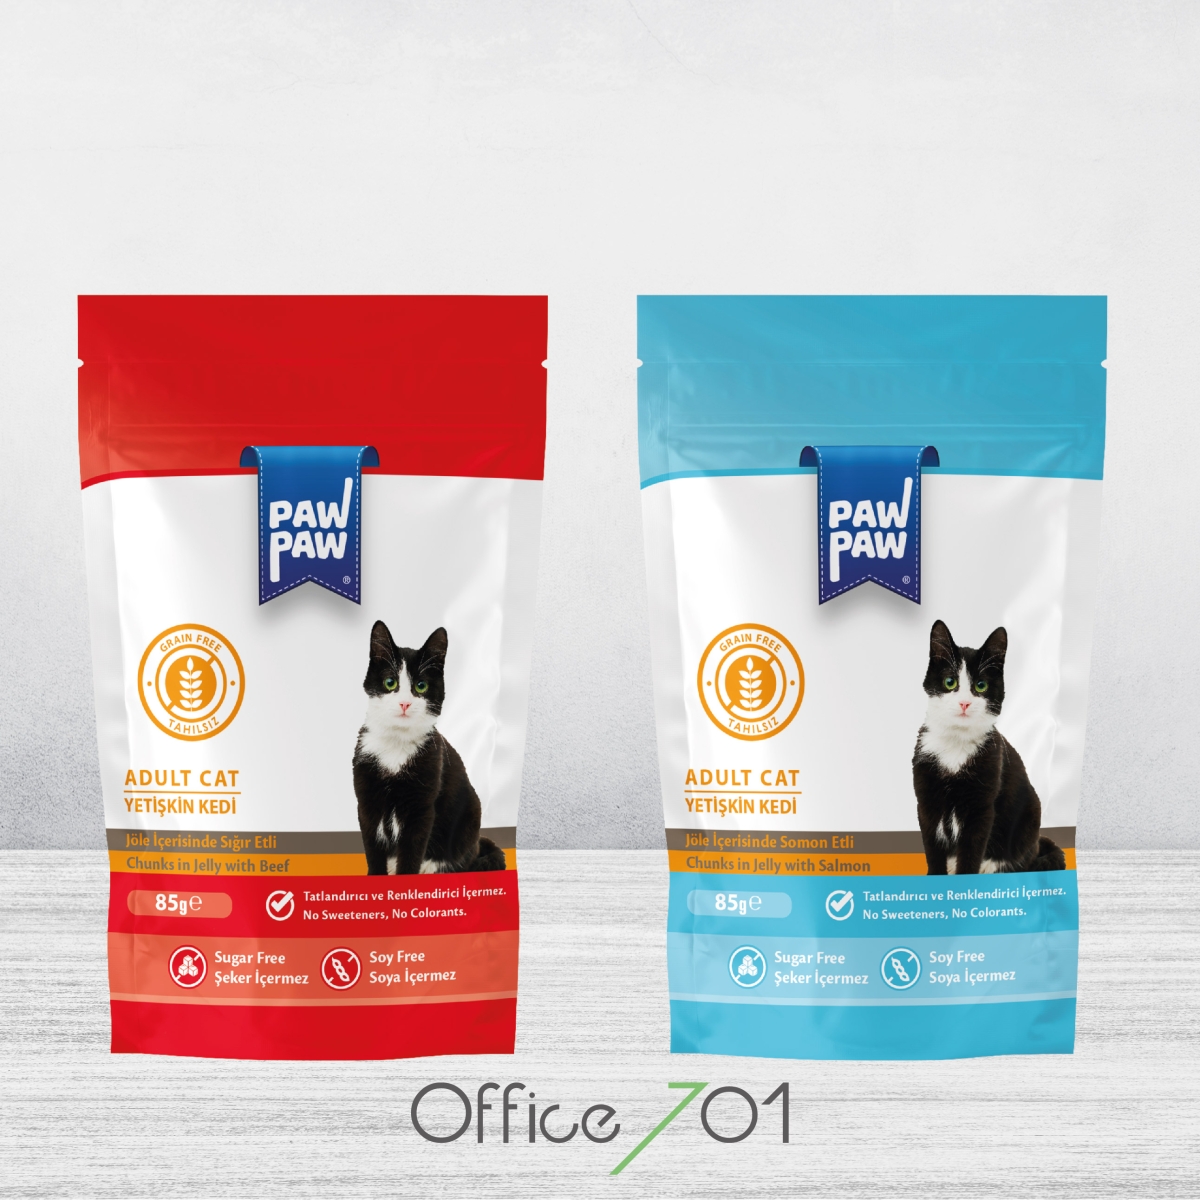 Office701 | Pawpaw Pouch Wet Pet Food Packaging Design